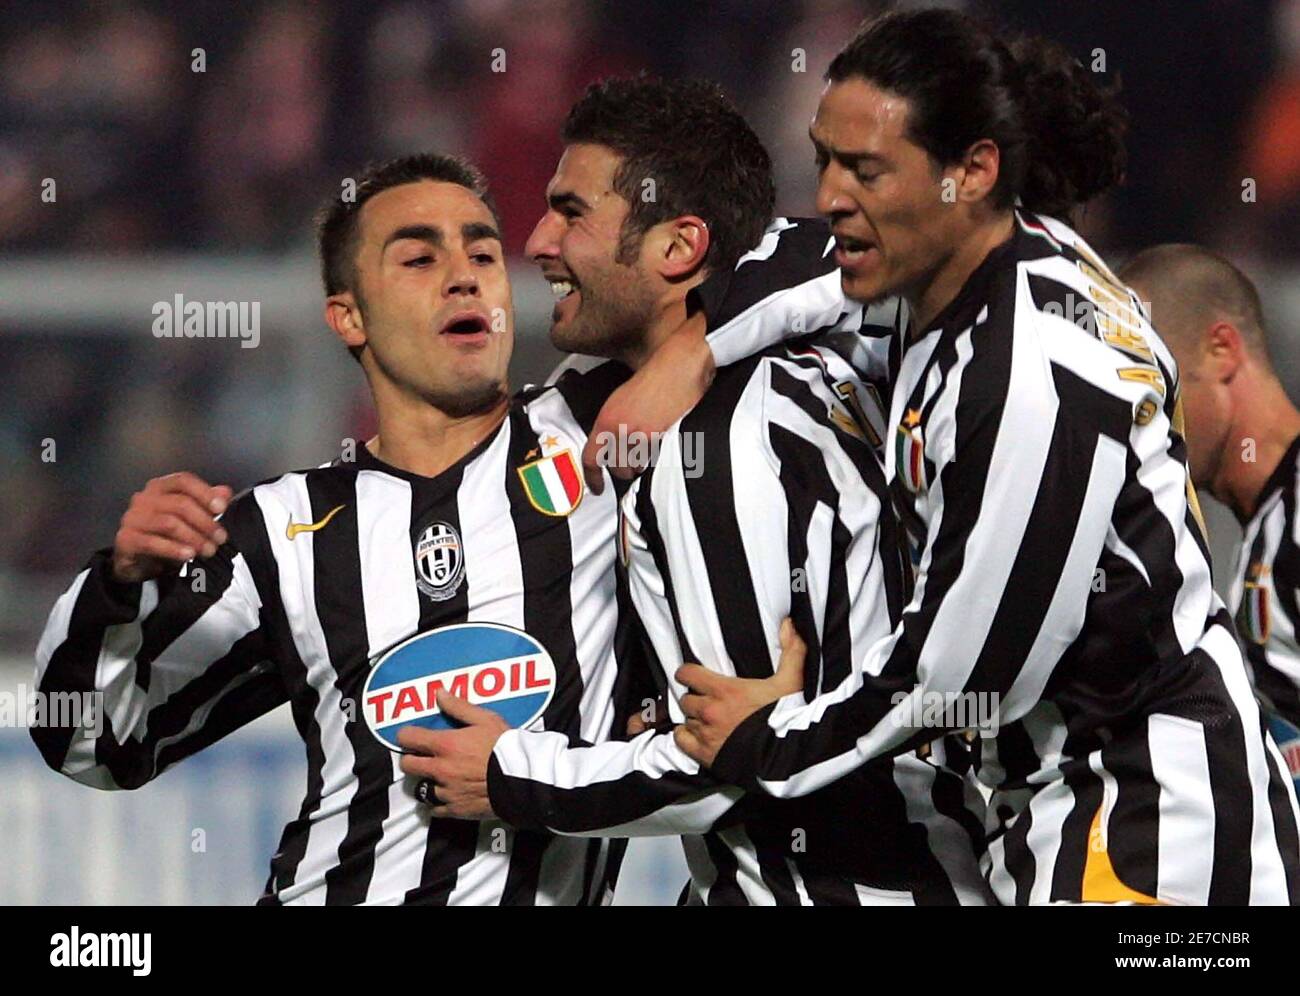 Juventus' Adrian Mutu (C) celebrates with his team mate Fabio Cannavaro (L)  and Mauro Camoranesi after scoring against Palermo during their Italian  Serie A soccer match in Palermo January 7, 2006. REUTERS/Antonio